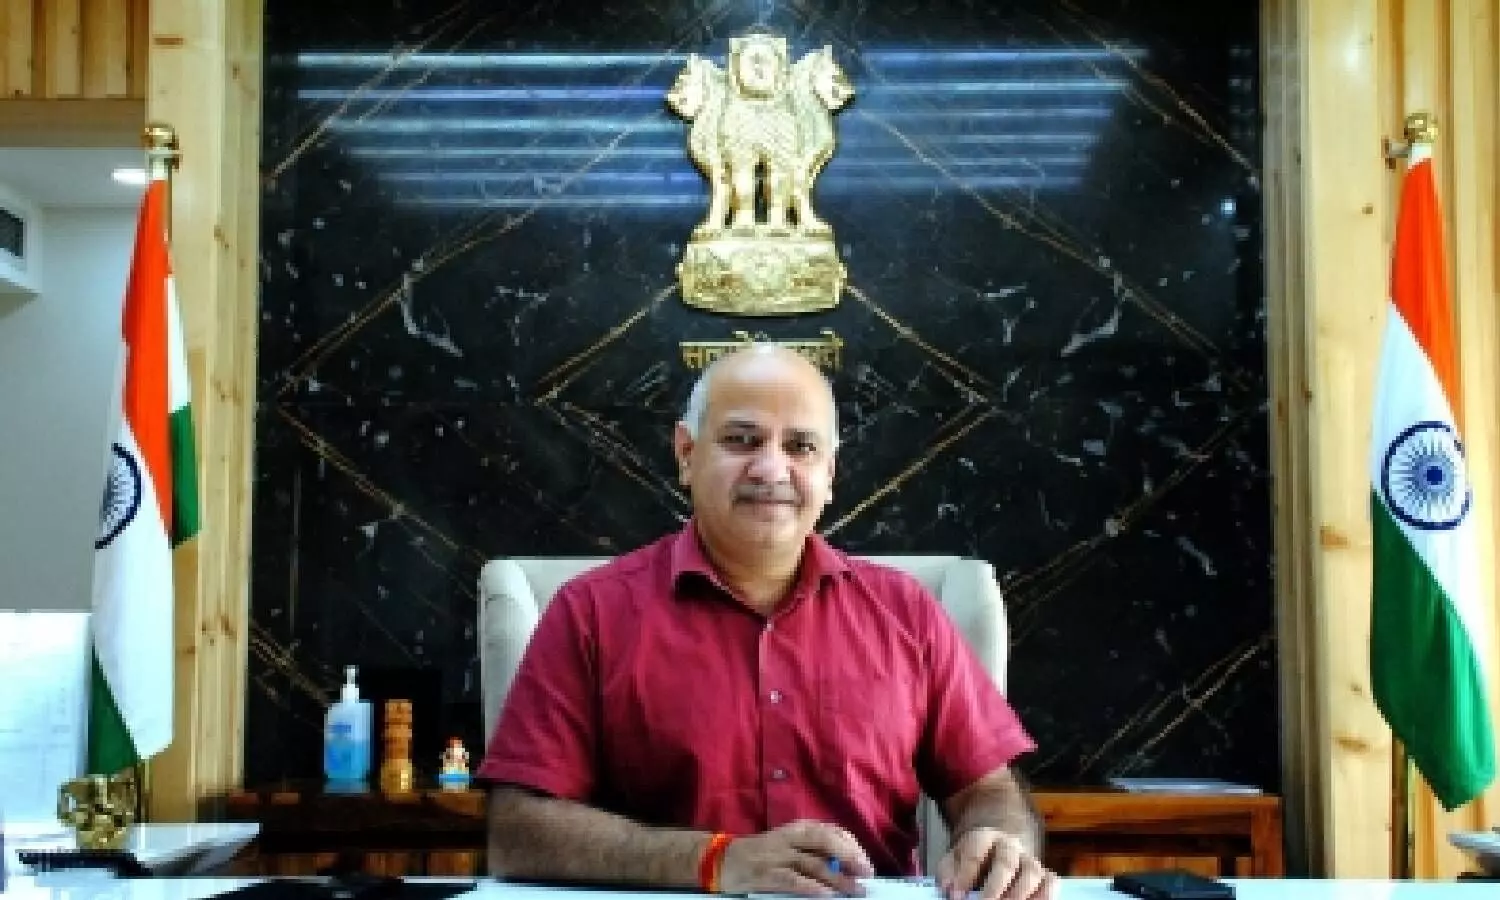 Delhi govt to get extra revenue of Rs 3,500 cr under new excise policy